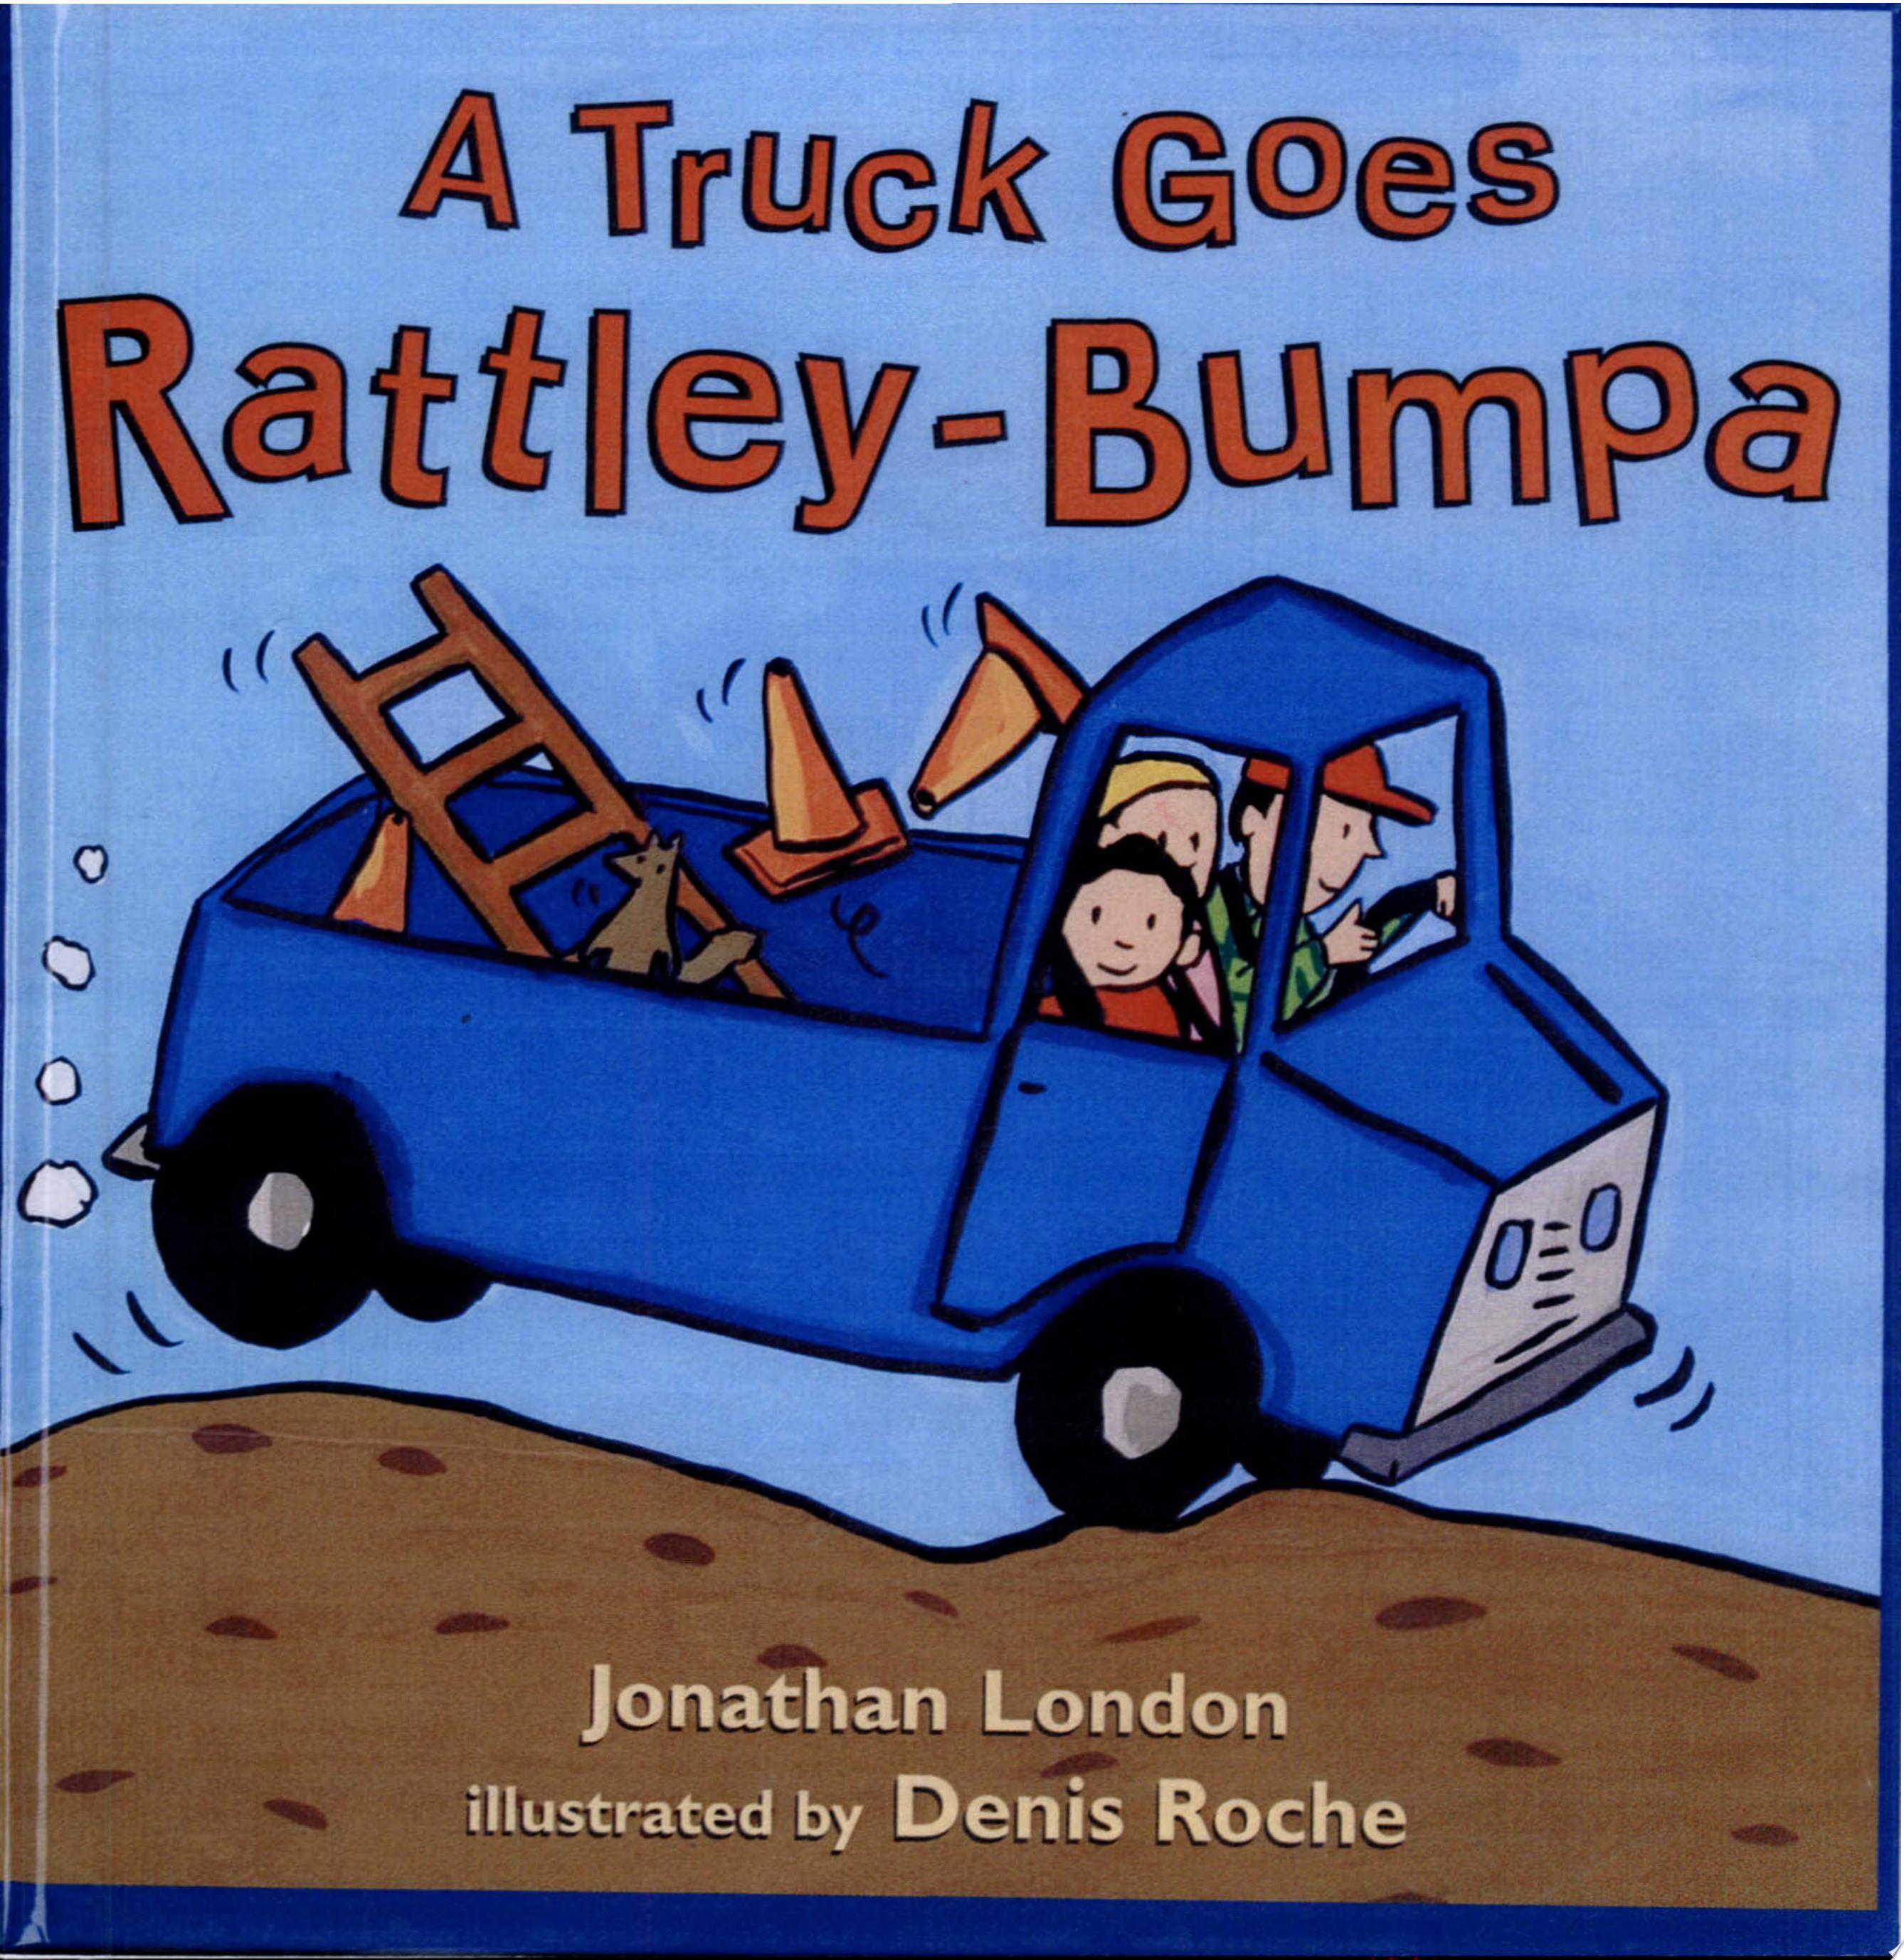 Image for "A Truck Goes Rattley-Bumpa"